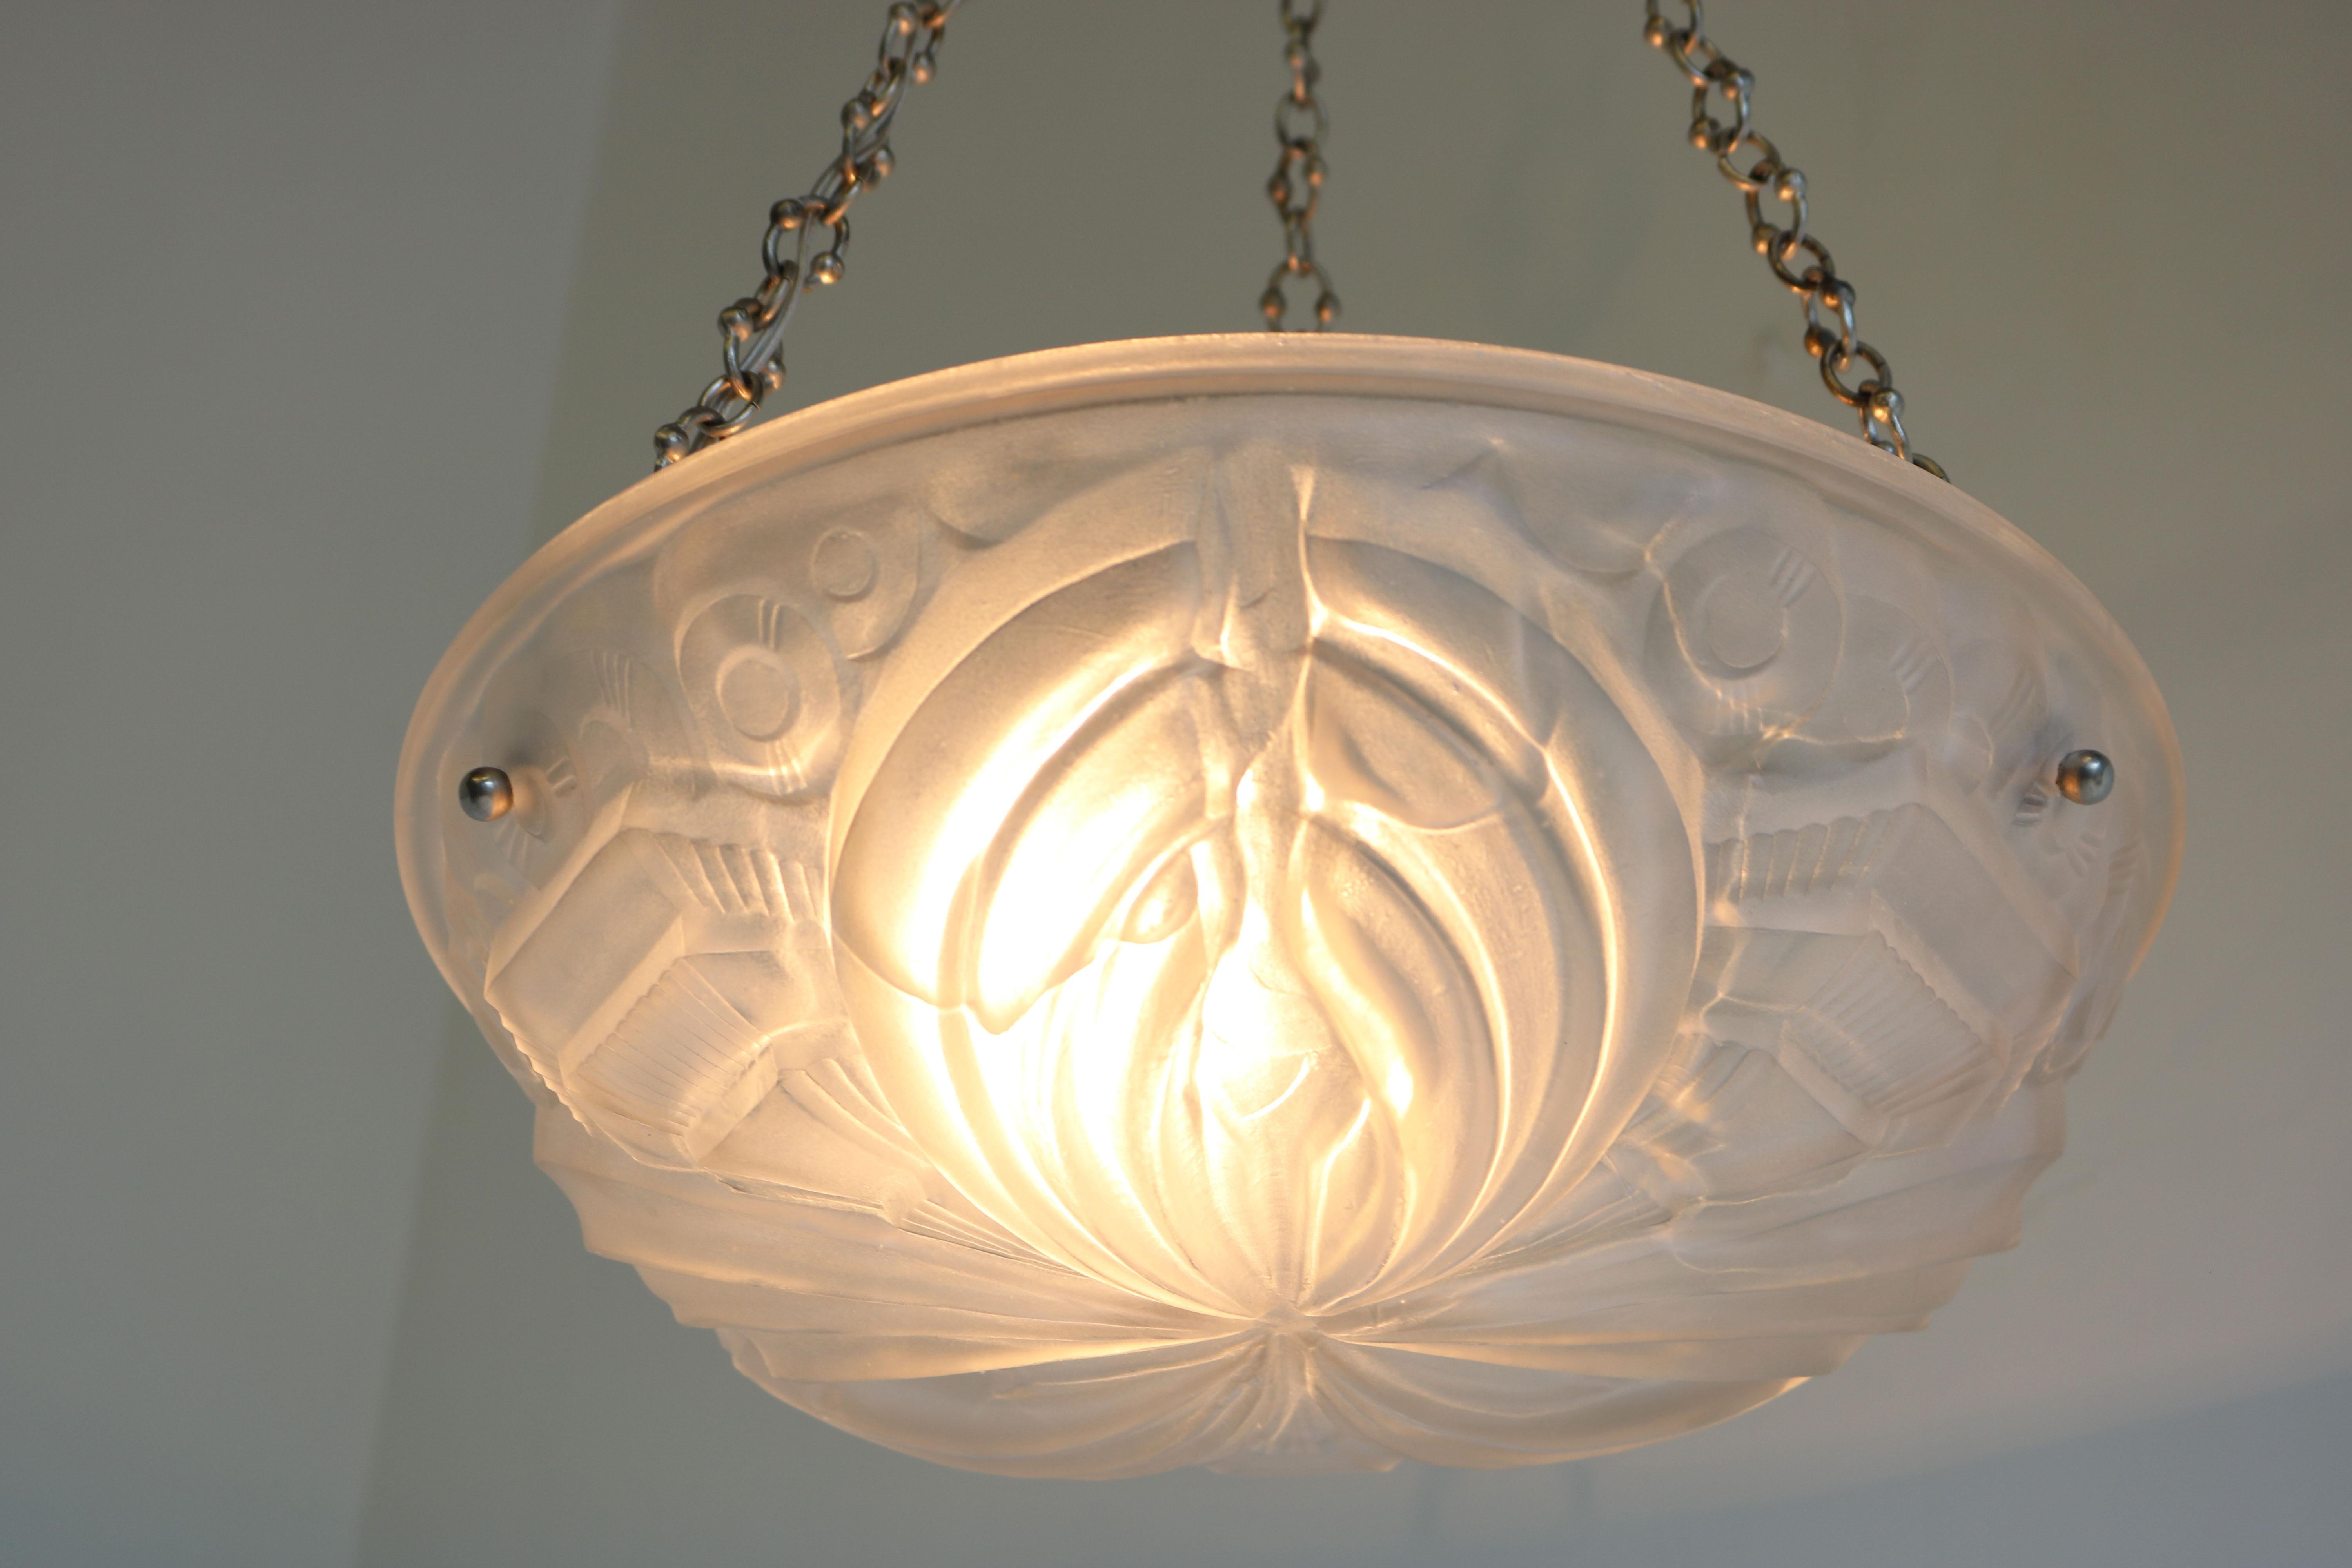 Glass Exquisite White Geometric French Antique Art Deco Chandelier 1930 Henry Mouynet For Sale